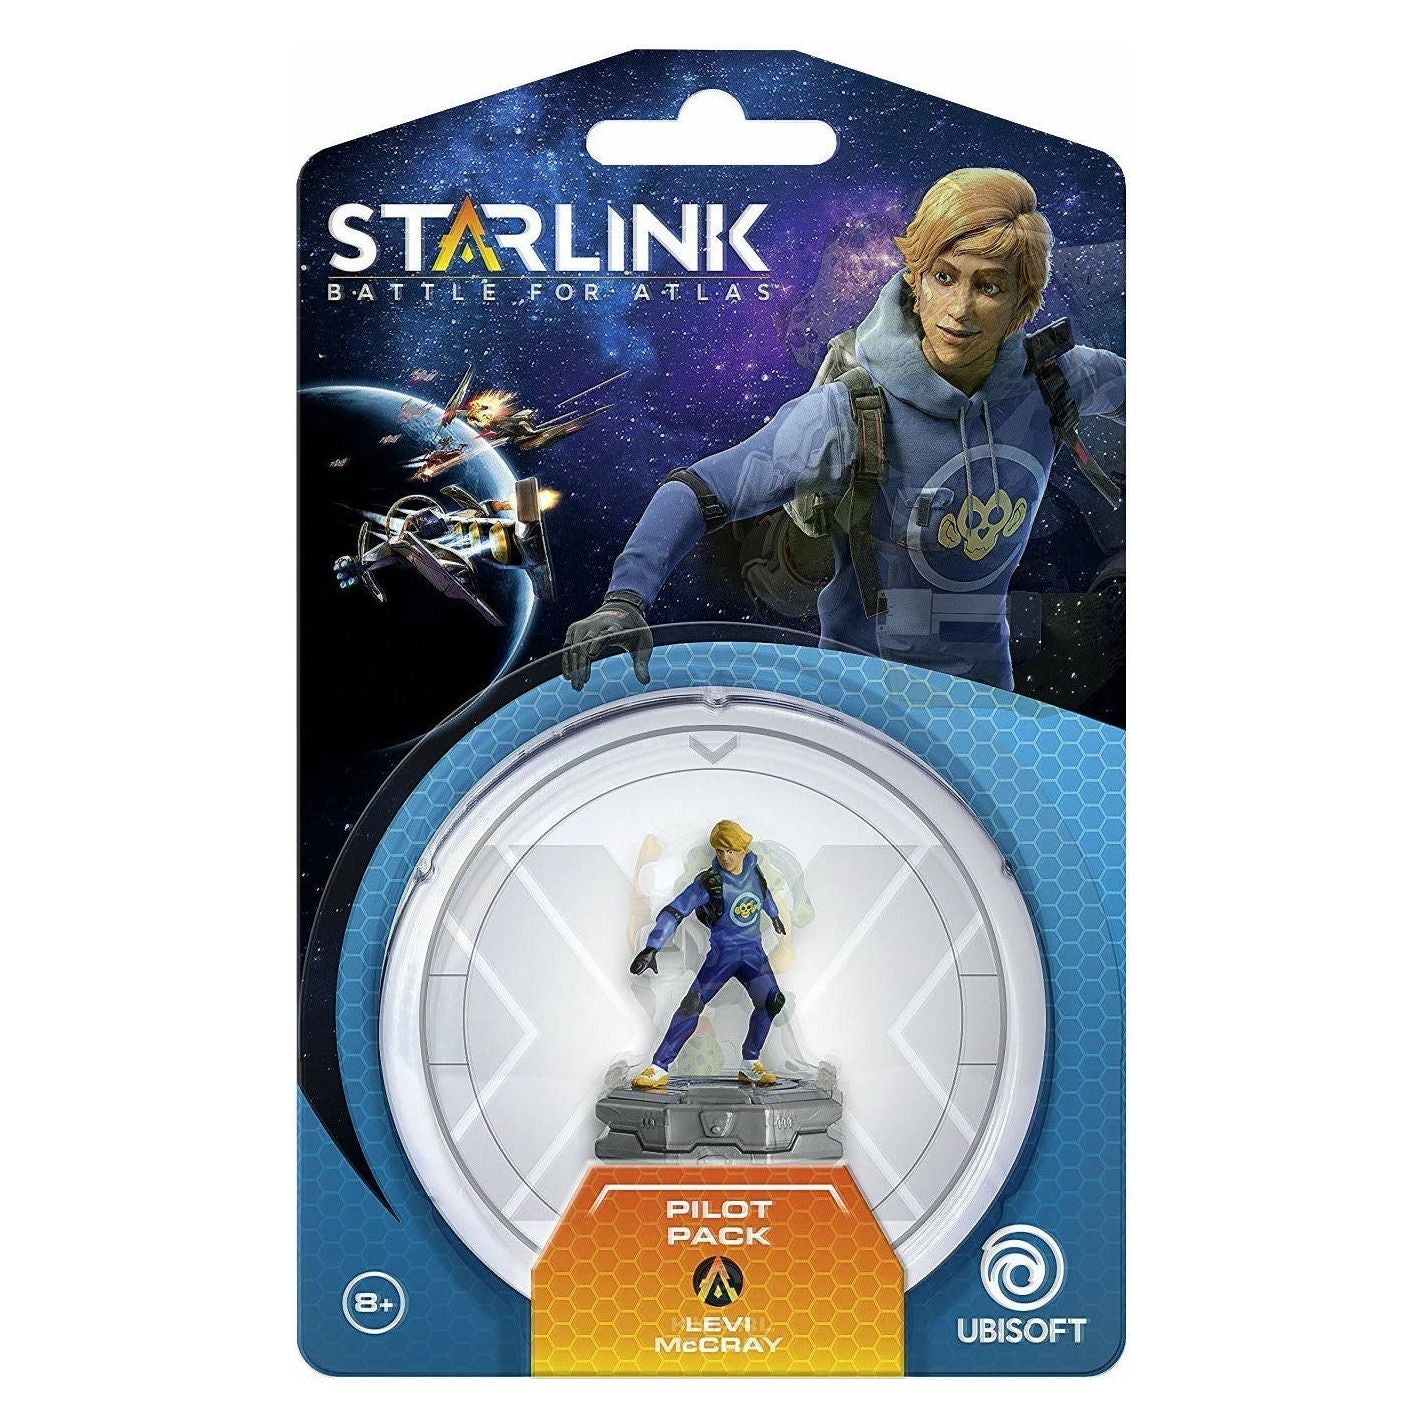 Starlink Battle For Atlas Pilot Pack Levi ( Out Of Box)